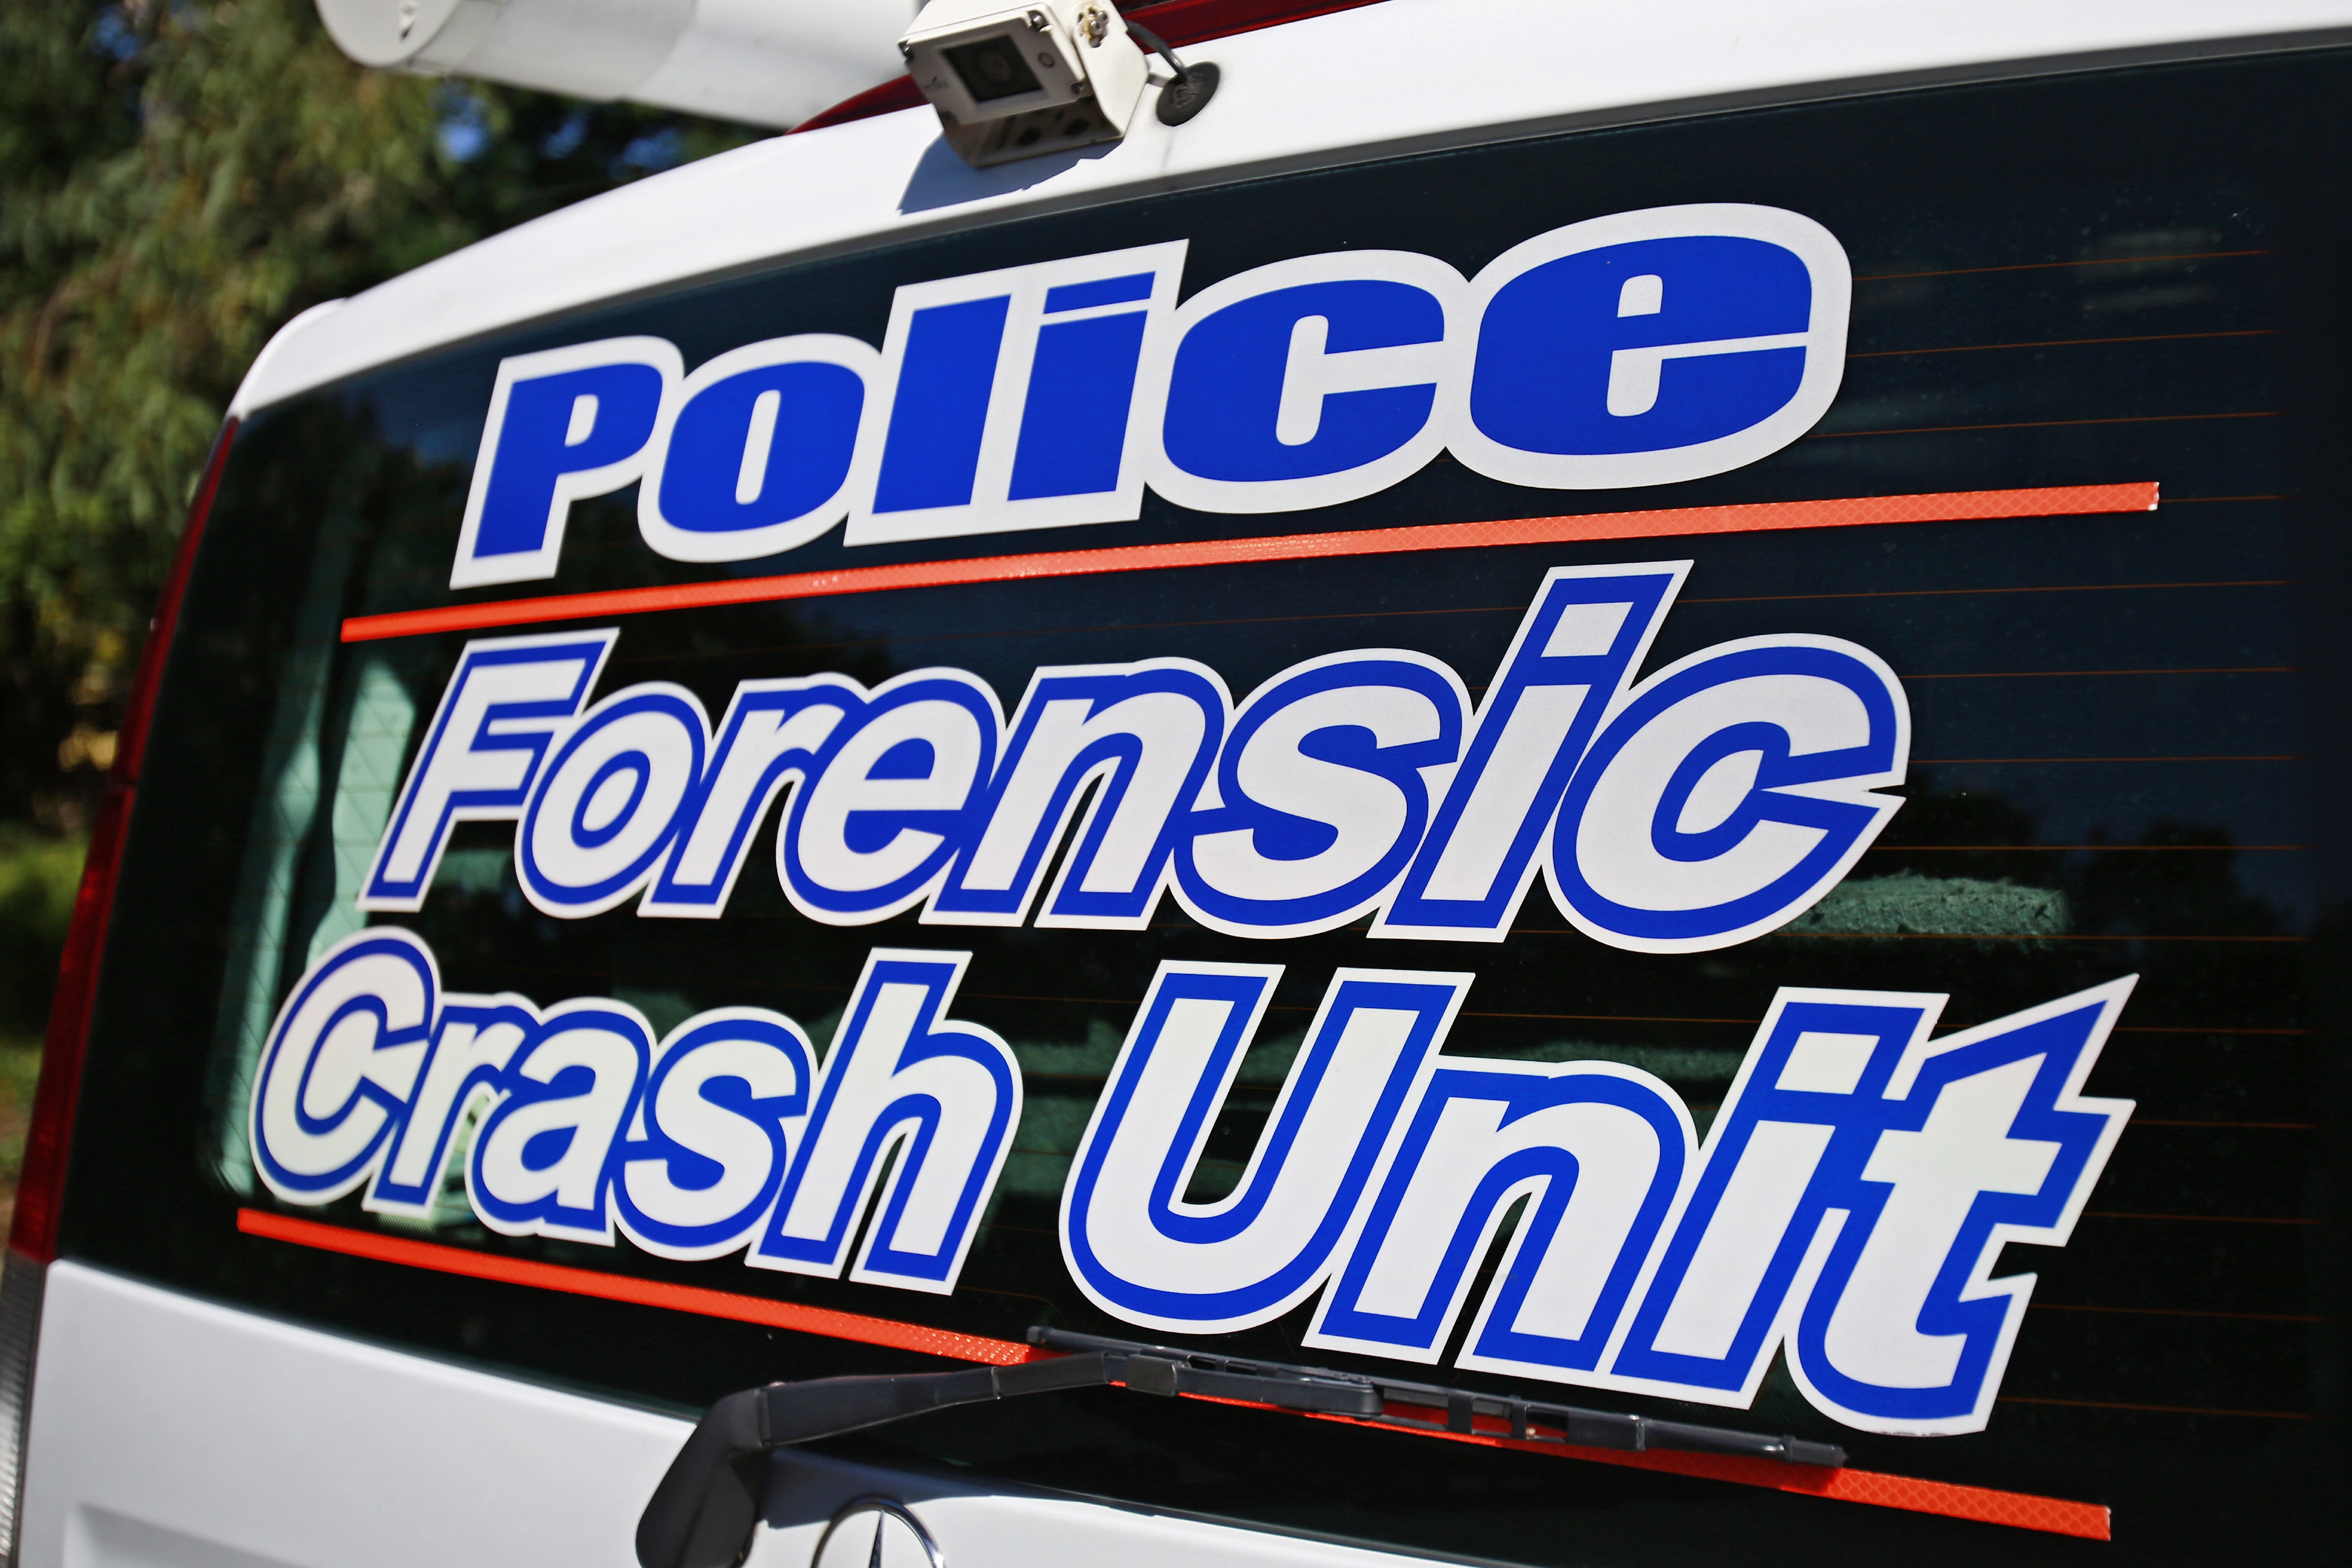 Three Townsville men involved in tragic crash south of Mackay